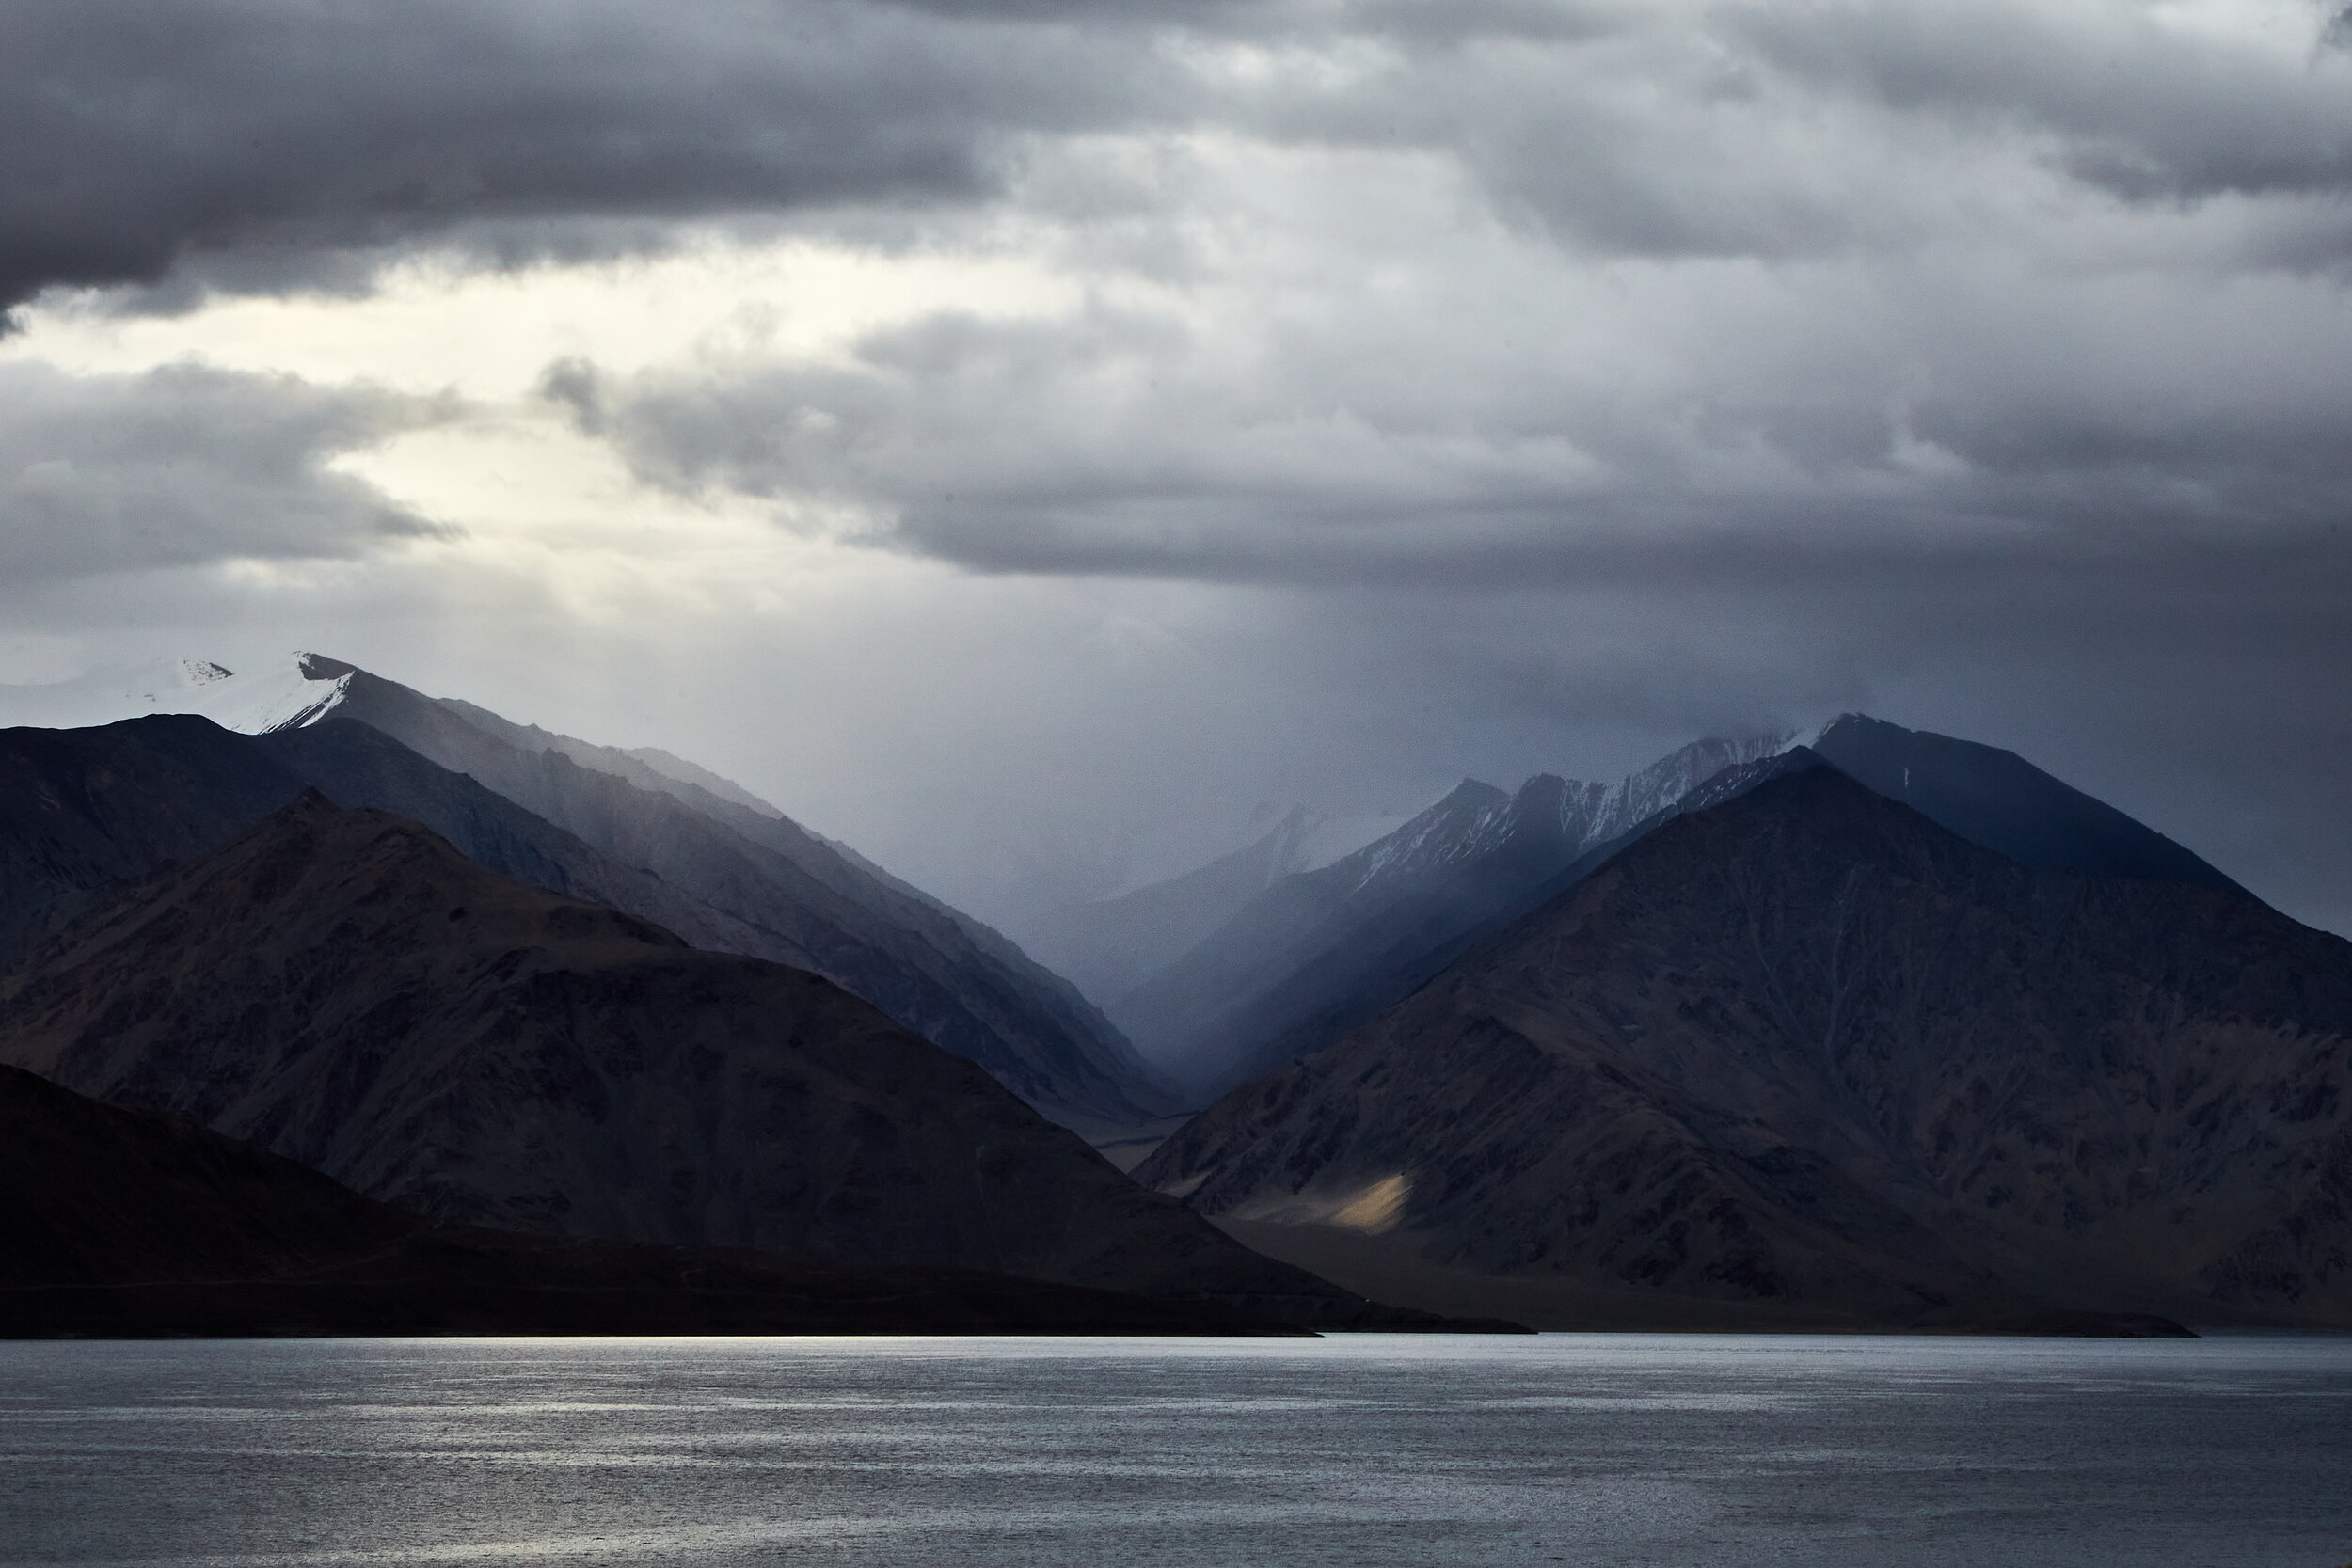  The landscape on the other side of the Pangong lake contributes to the Indian border with China. 